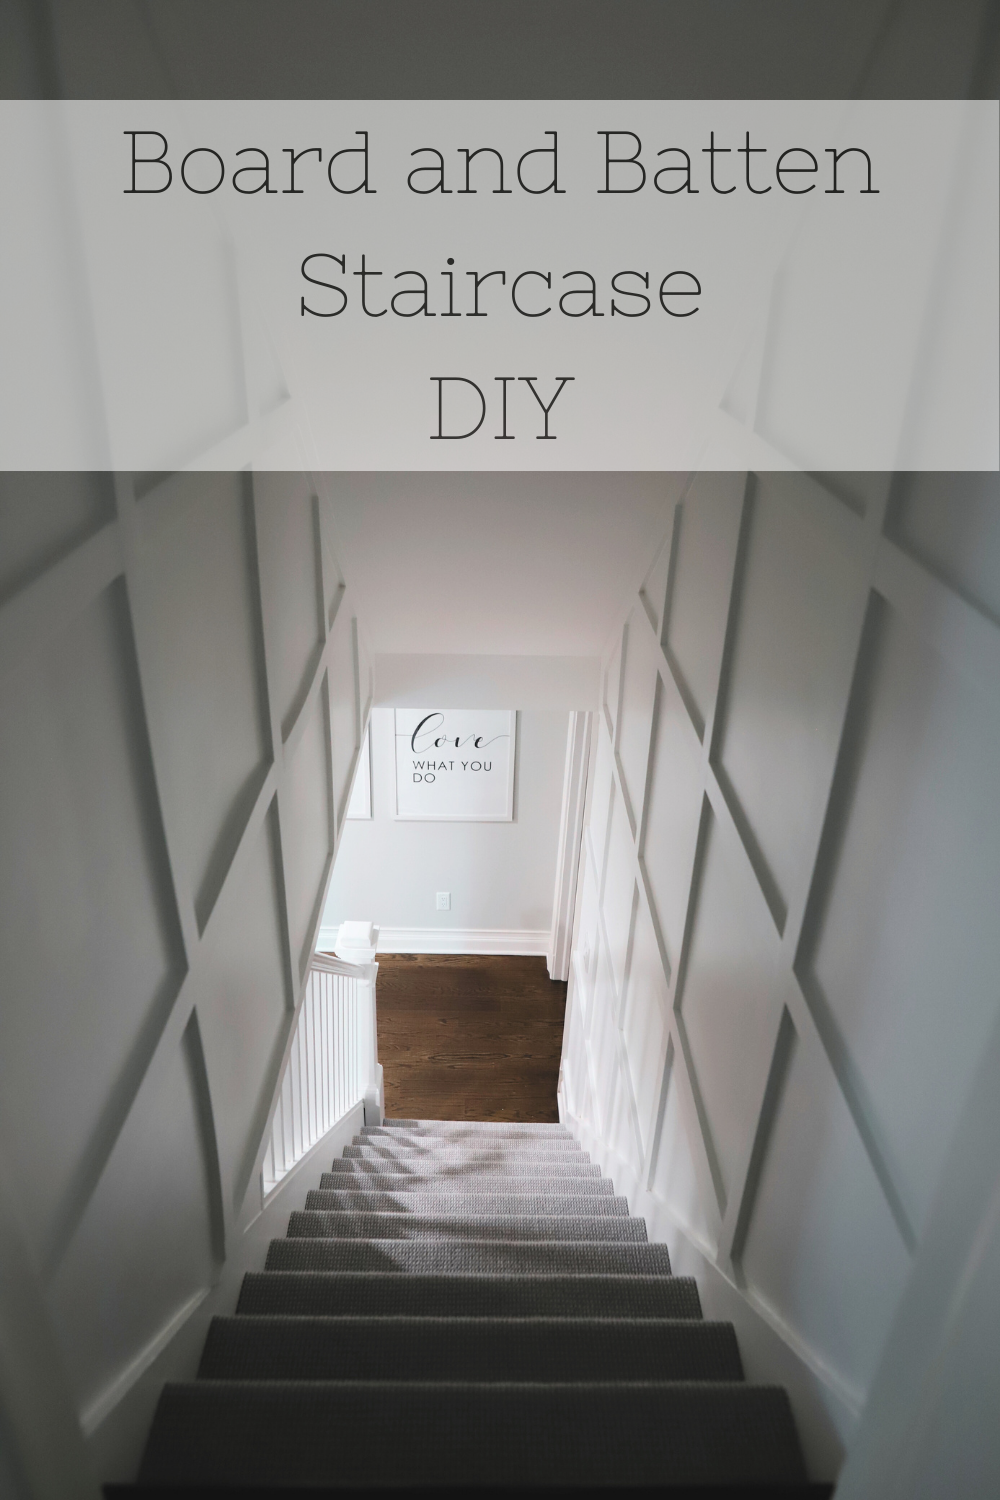 Board and Batten Staircase DIY